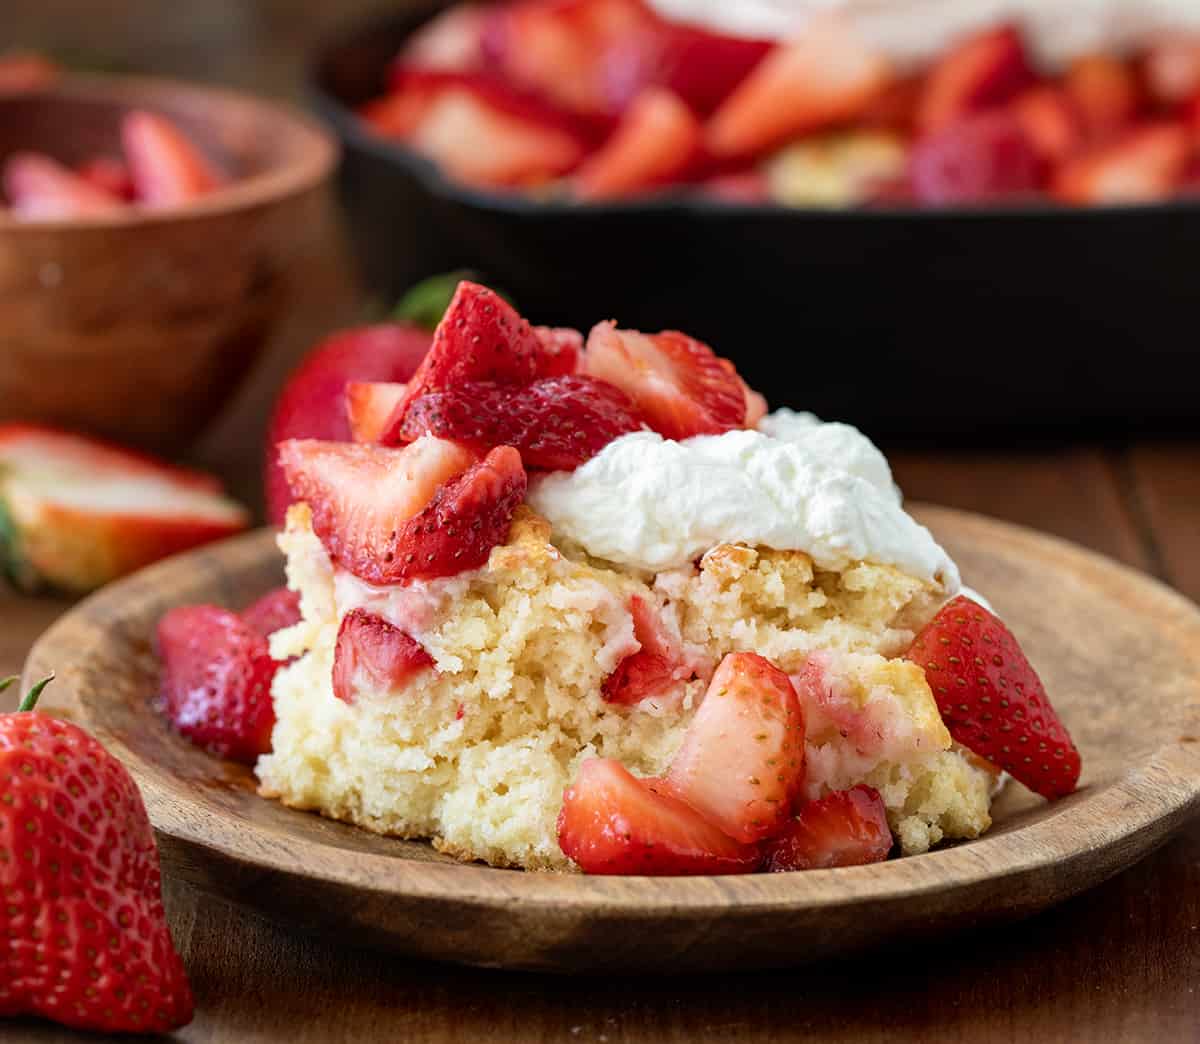 Plate of Skillet Strawberry Shortcake on a wooden table.